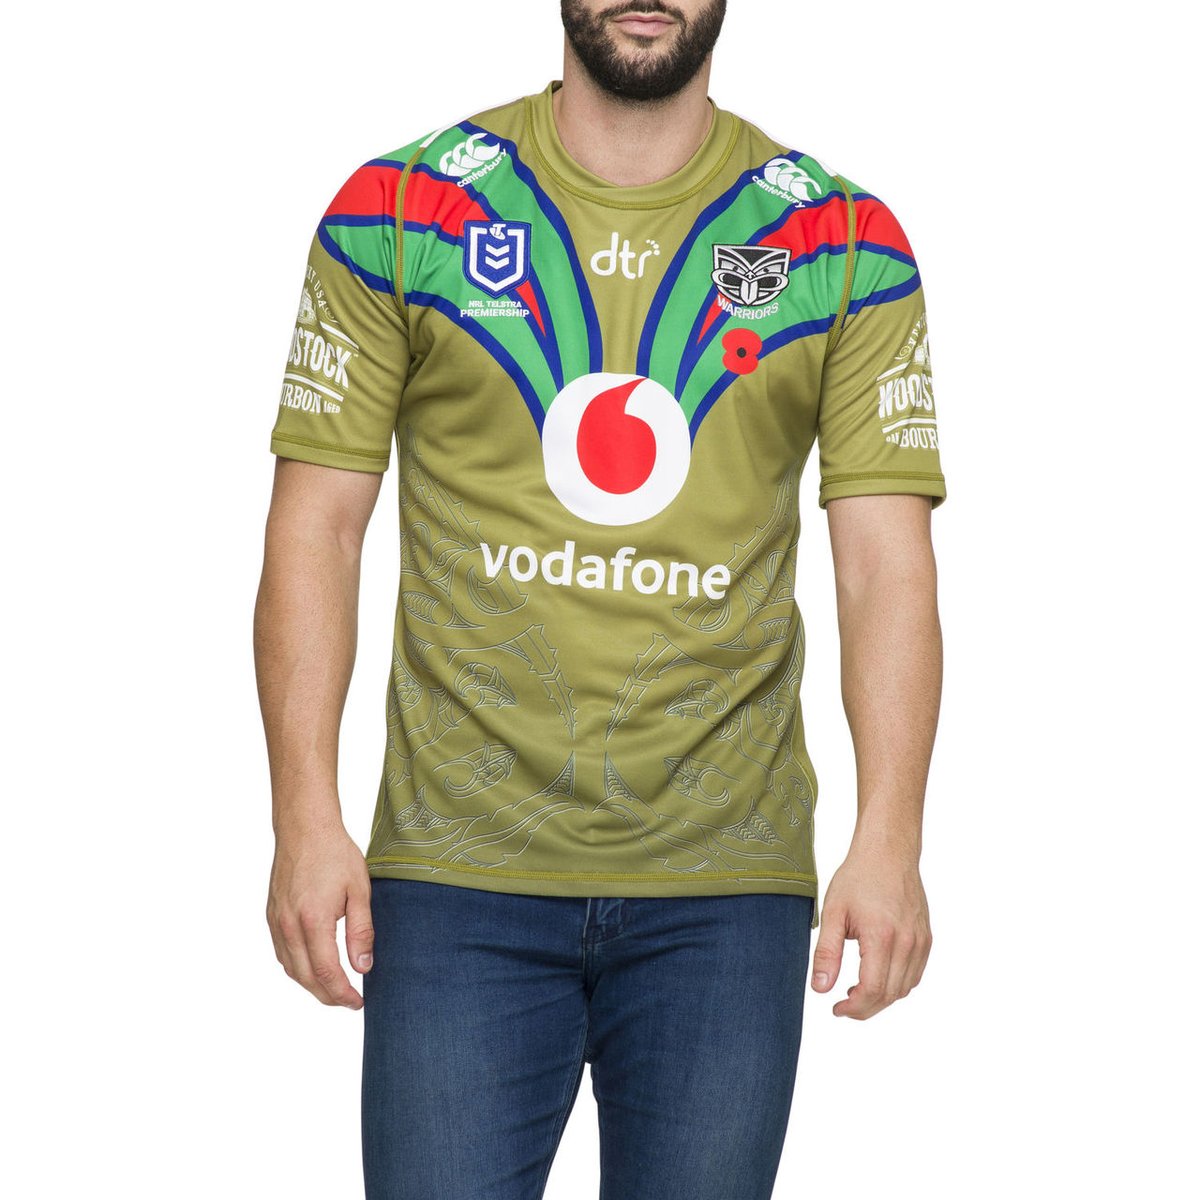 2020: Just the pits. The idea of using the muted, autumnal khaki of a WWI uniform was a pretty good one, but they just butchered it entirely by putting not one but 3 clashing primary colours on the collar. They could have used the greys and blacks of the 2019 away collar, but no